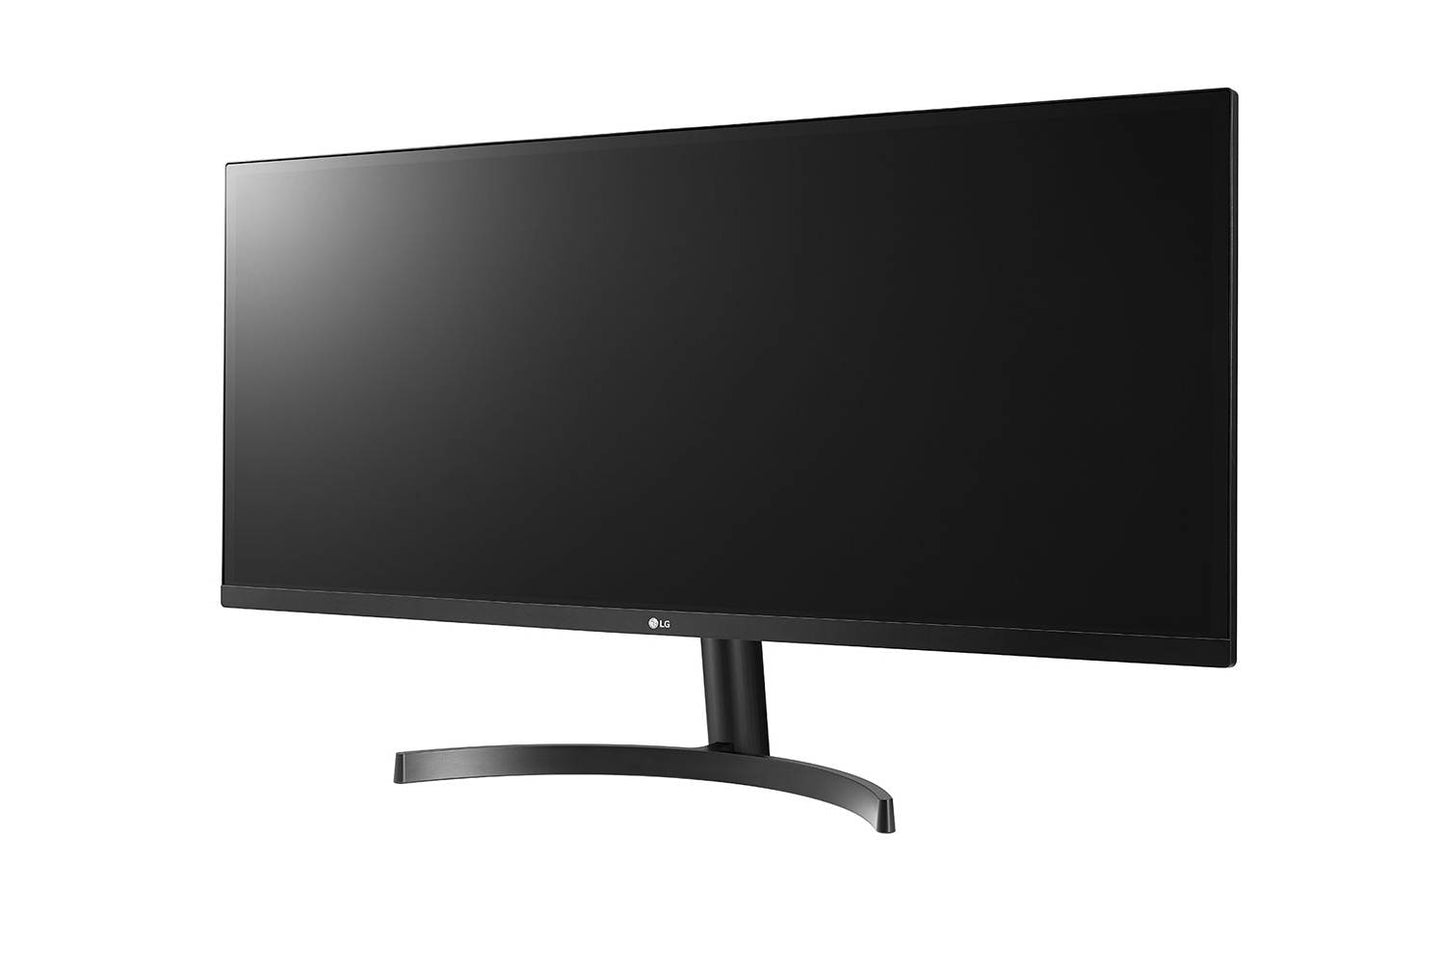 LG 34WL500 34 Inch 21:9 Ultra Wide 1080p Full HD IPS Monitor with HDR